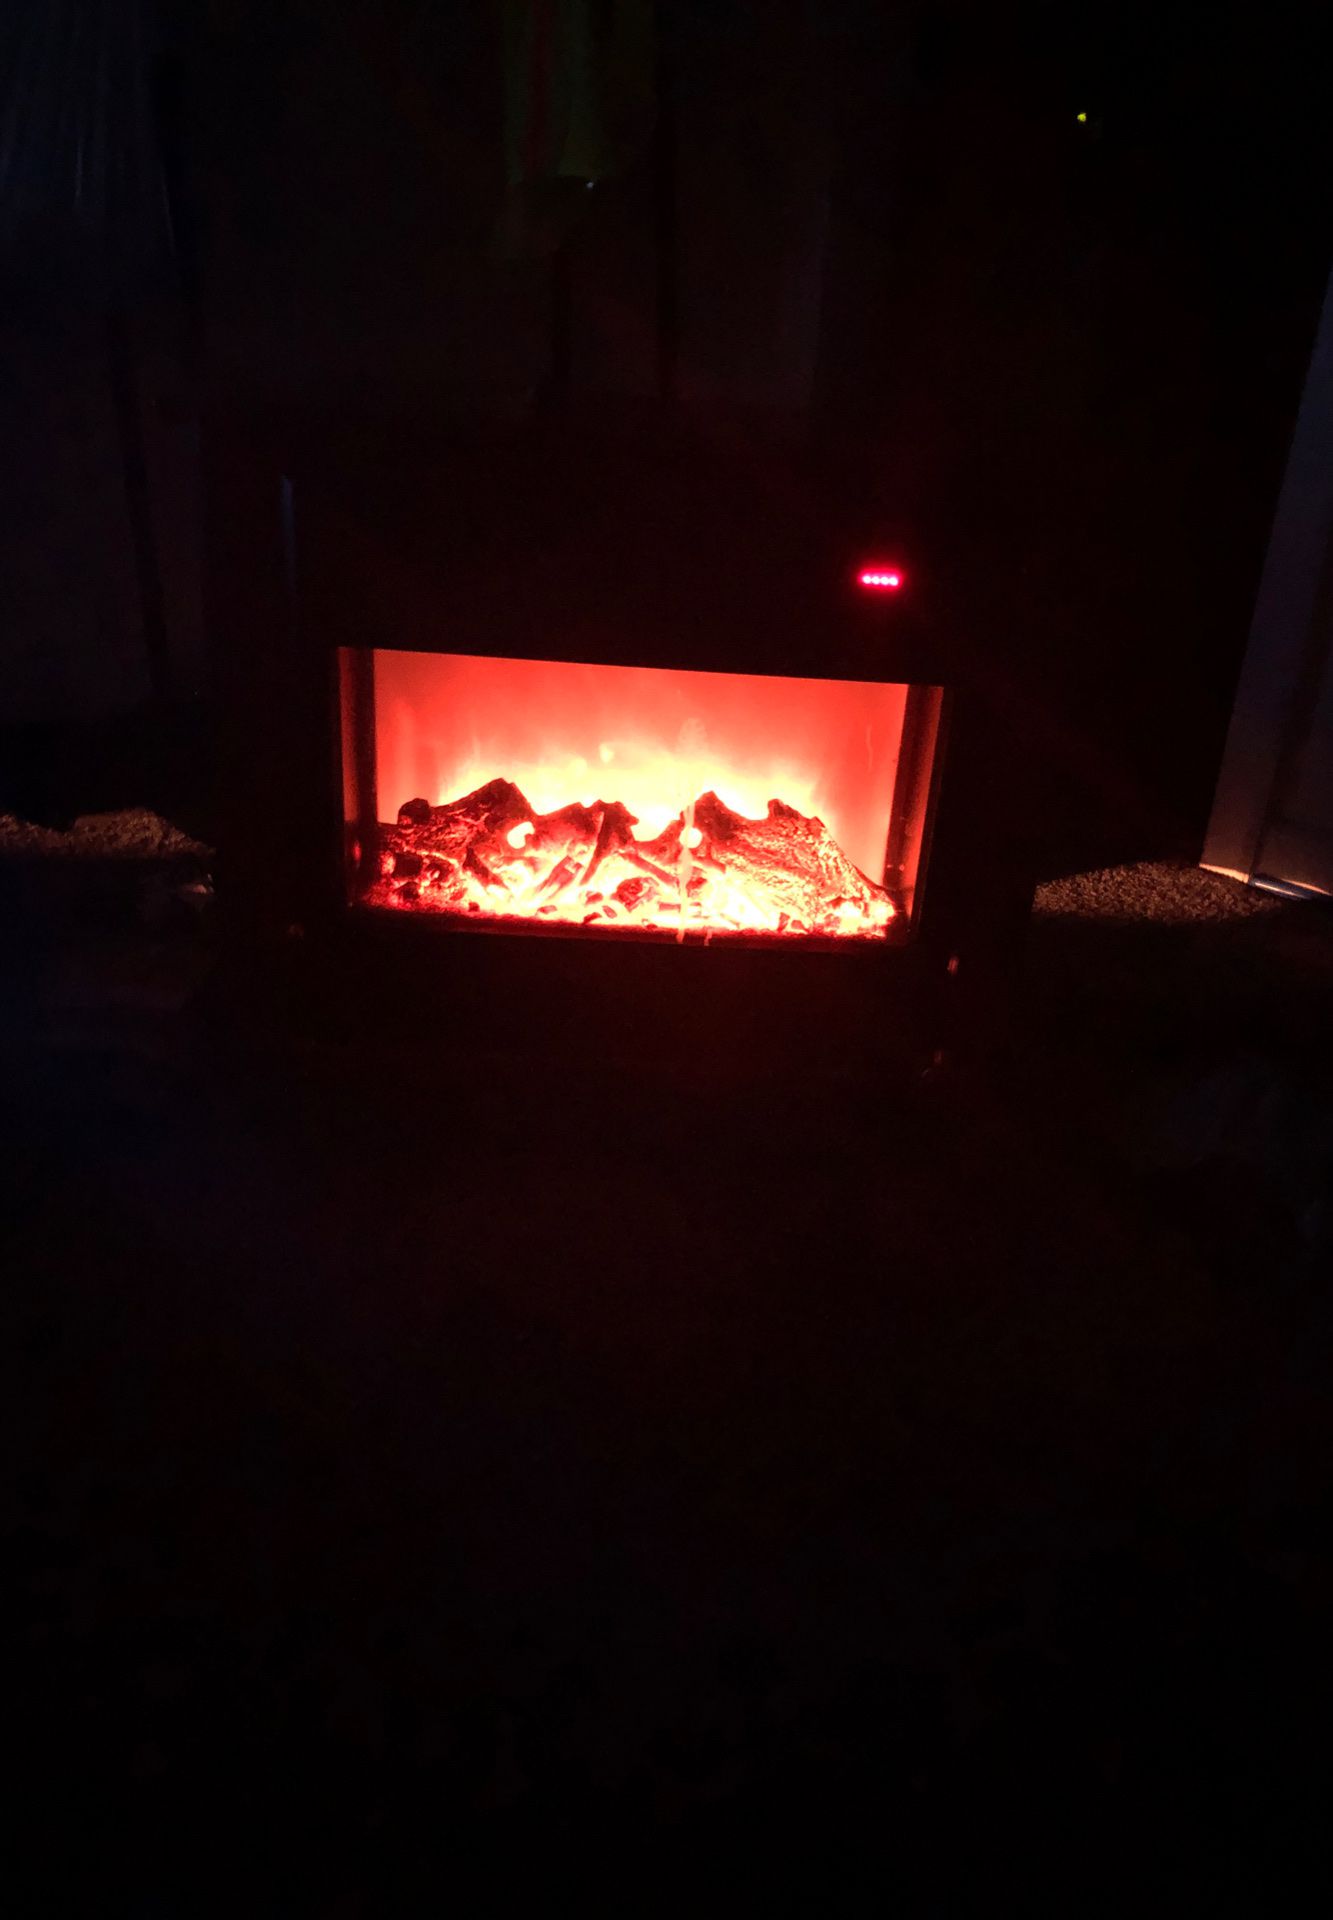 Electric heater fireplace display heater works great winter time approaches